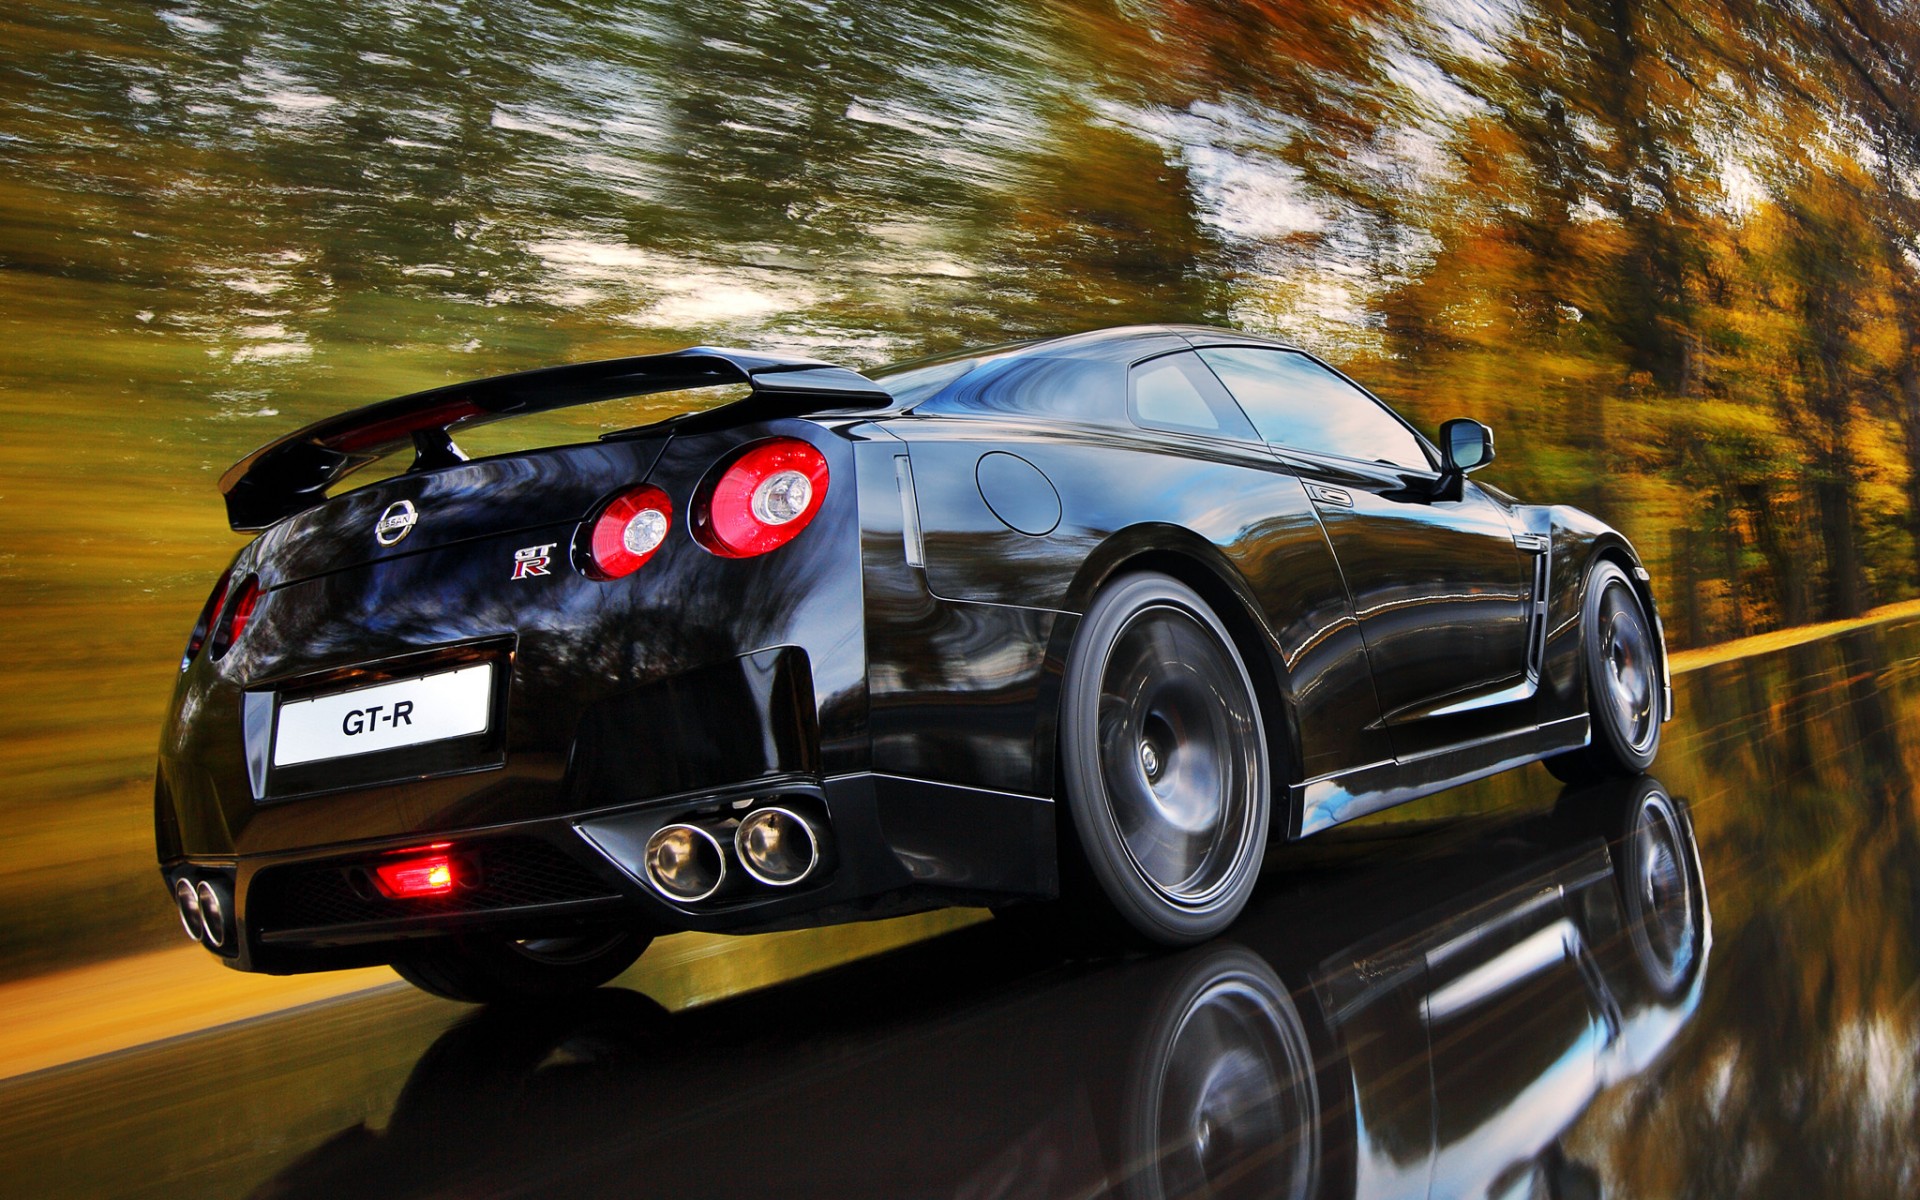 Nissan Gtr Wallpaper 1080p To Set This Gt R As